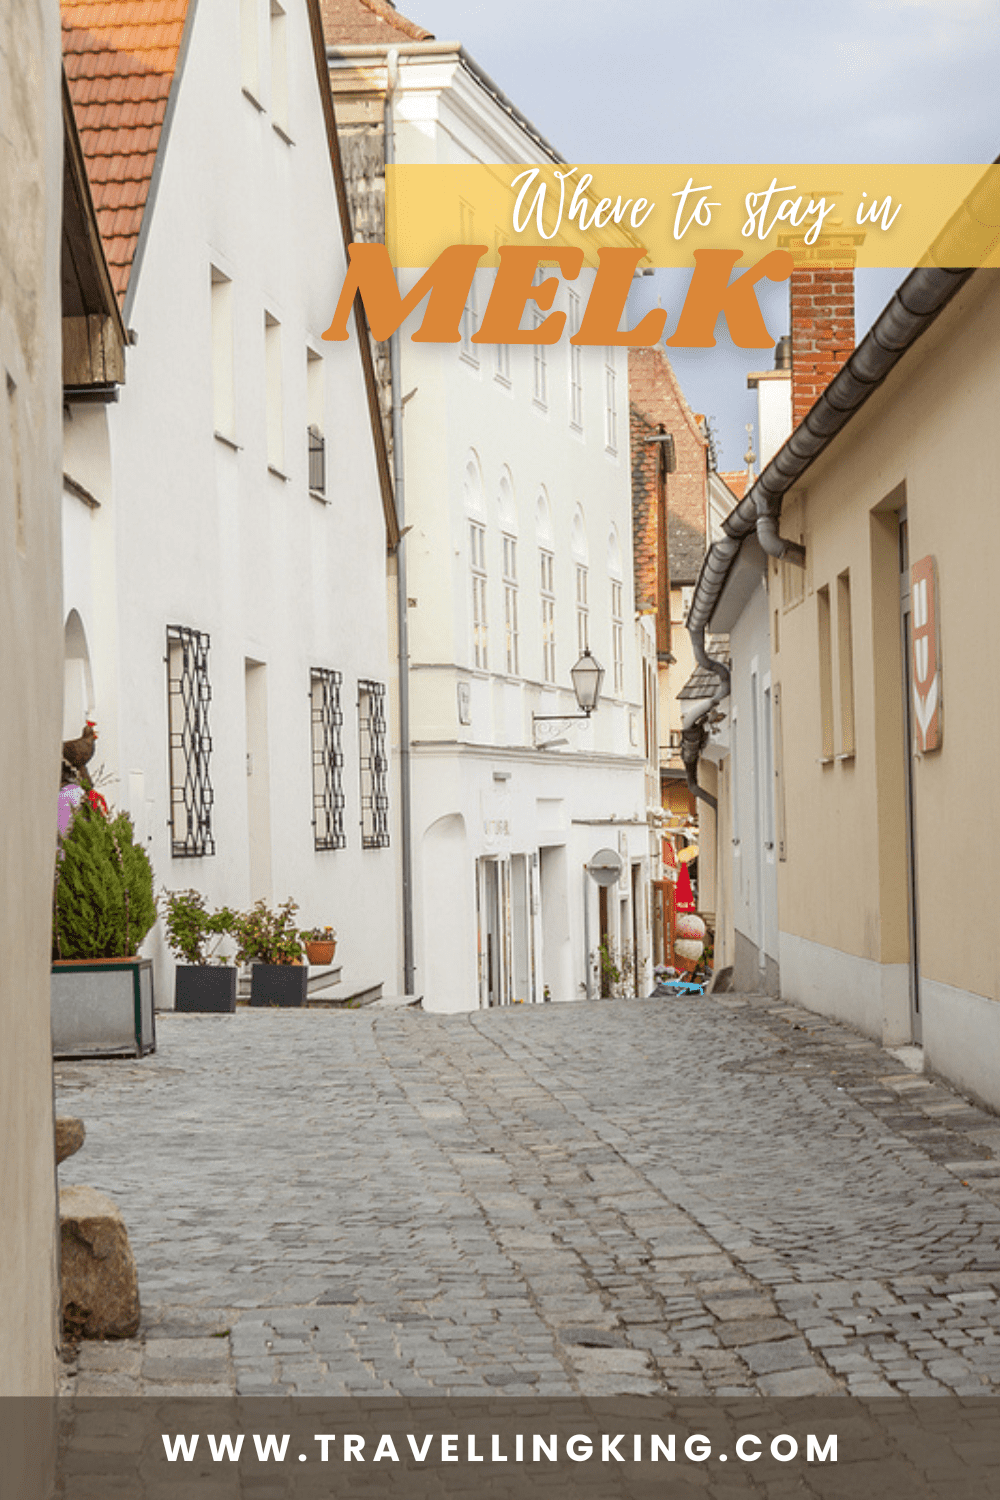 Where To Stay in Melk